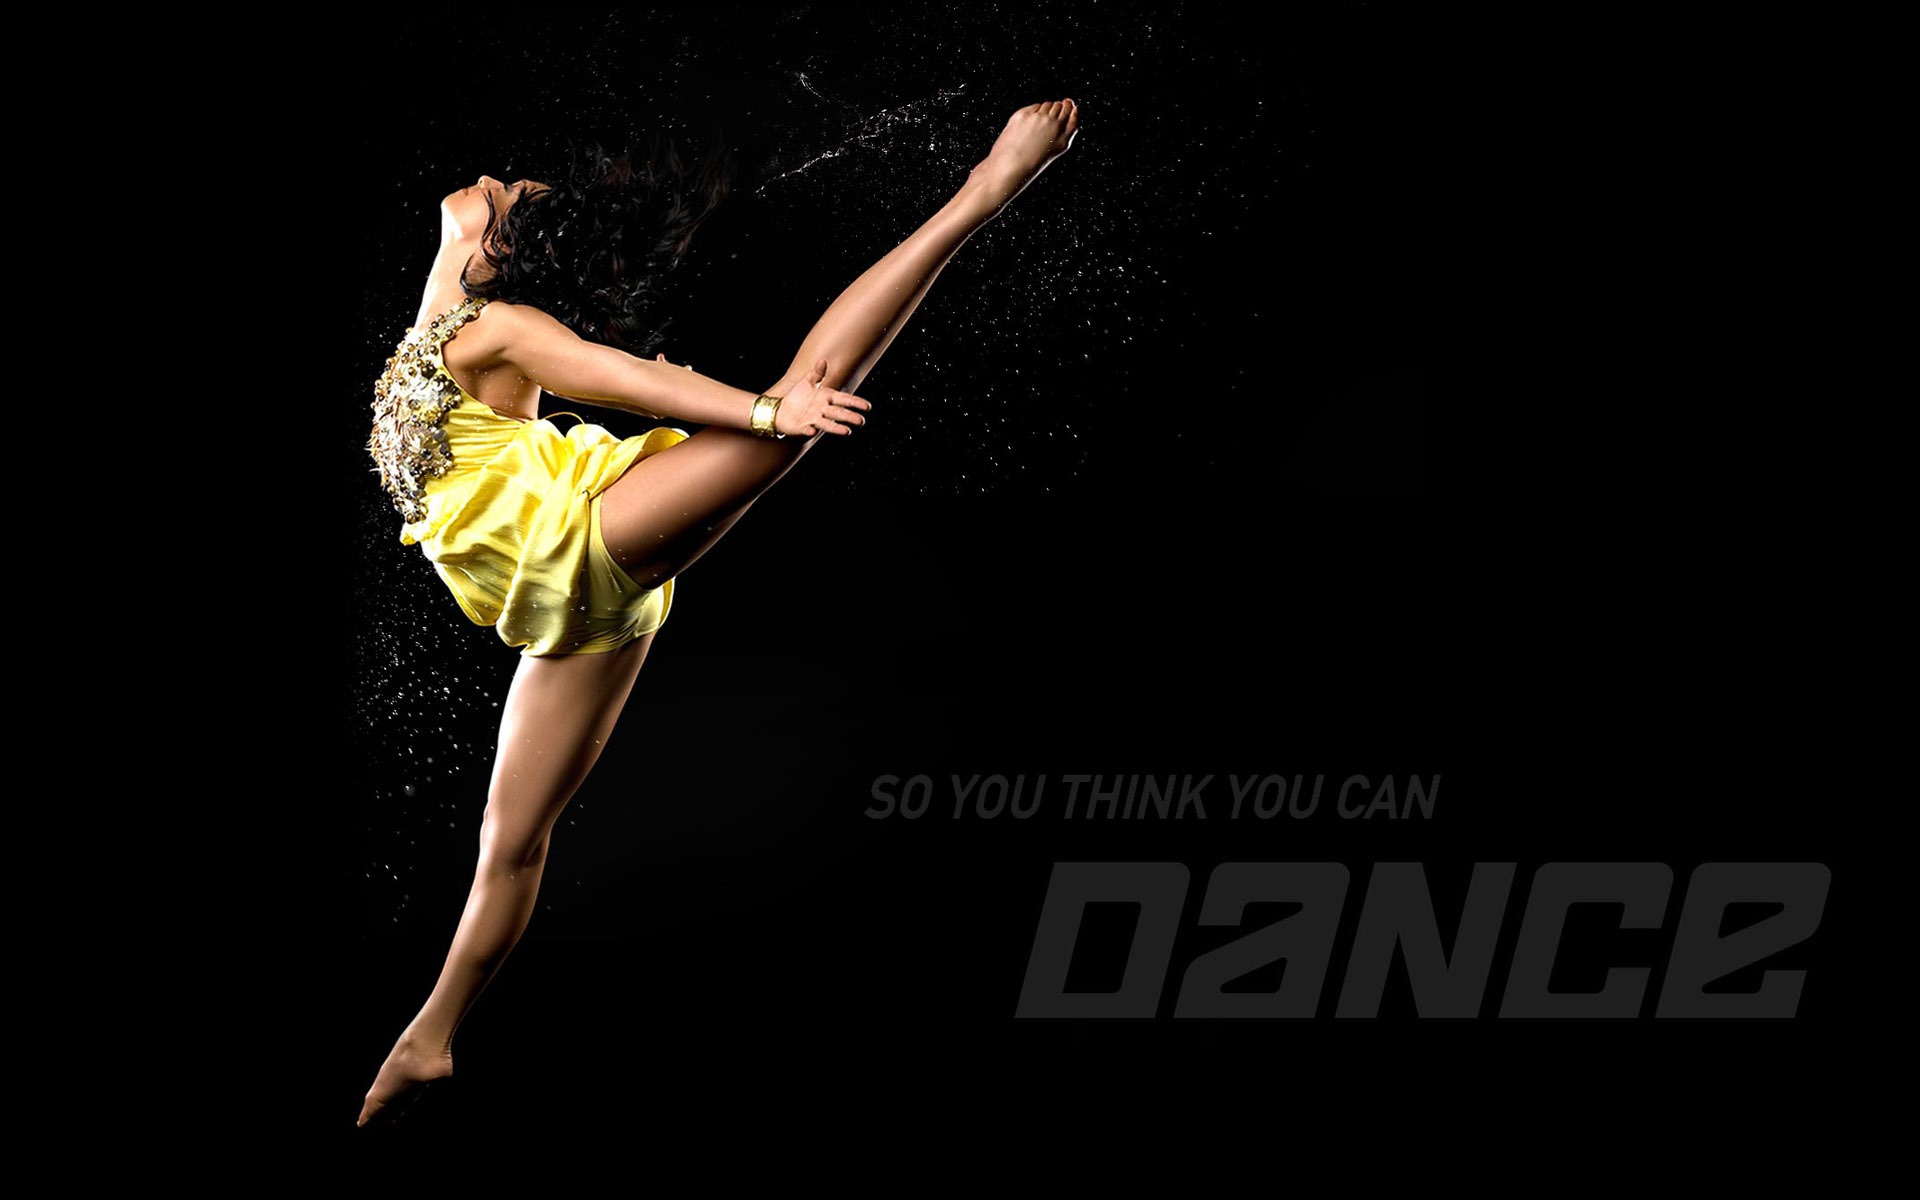 So You Think You Can Dance 舞林争霸 壁纸(一)19 - 1920x1200